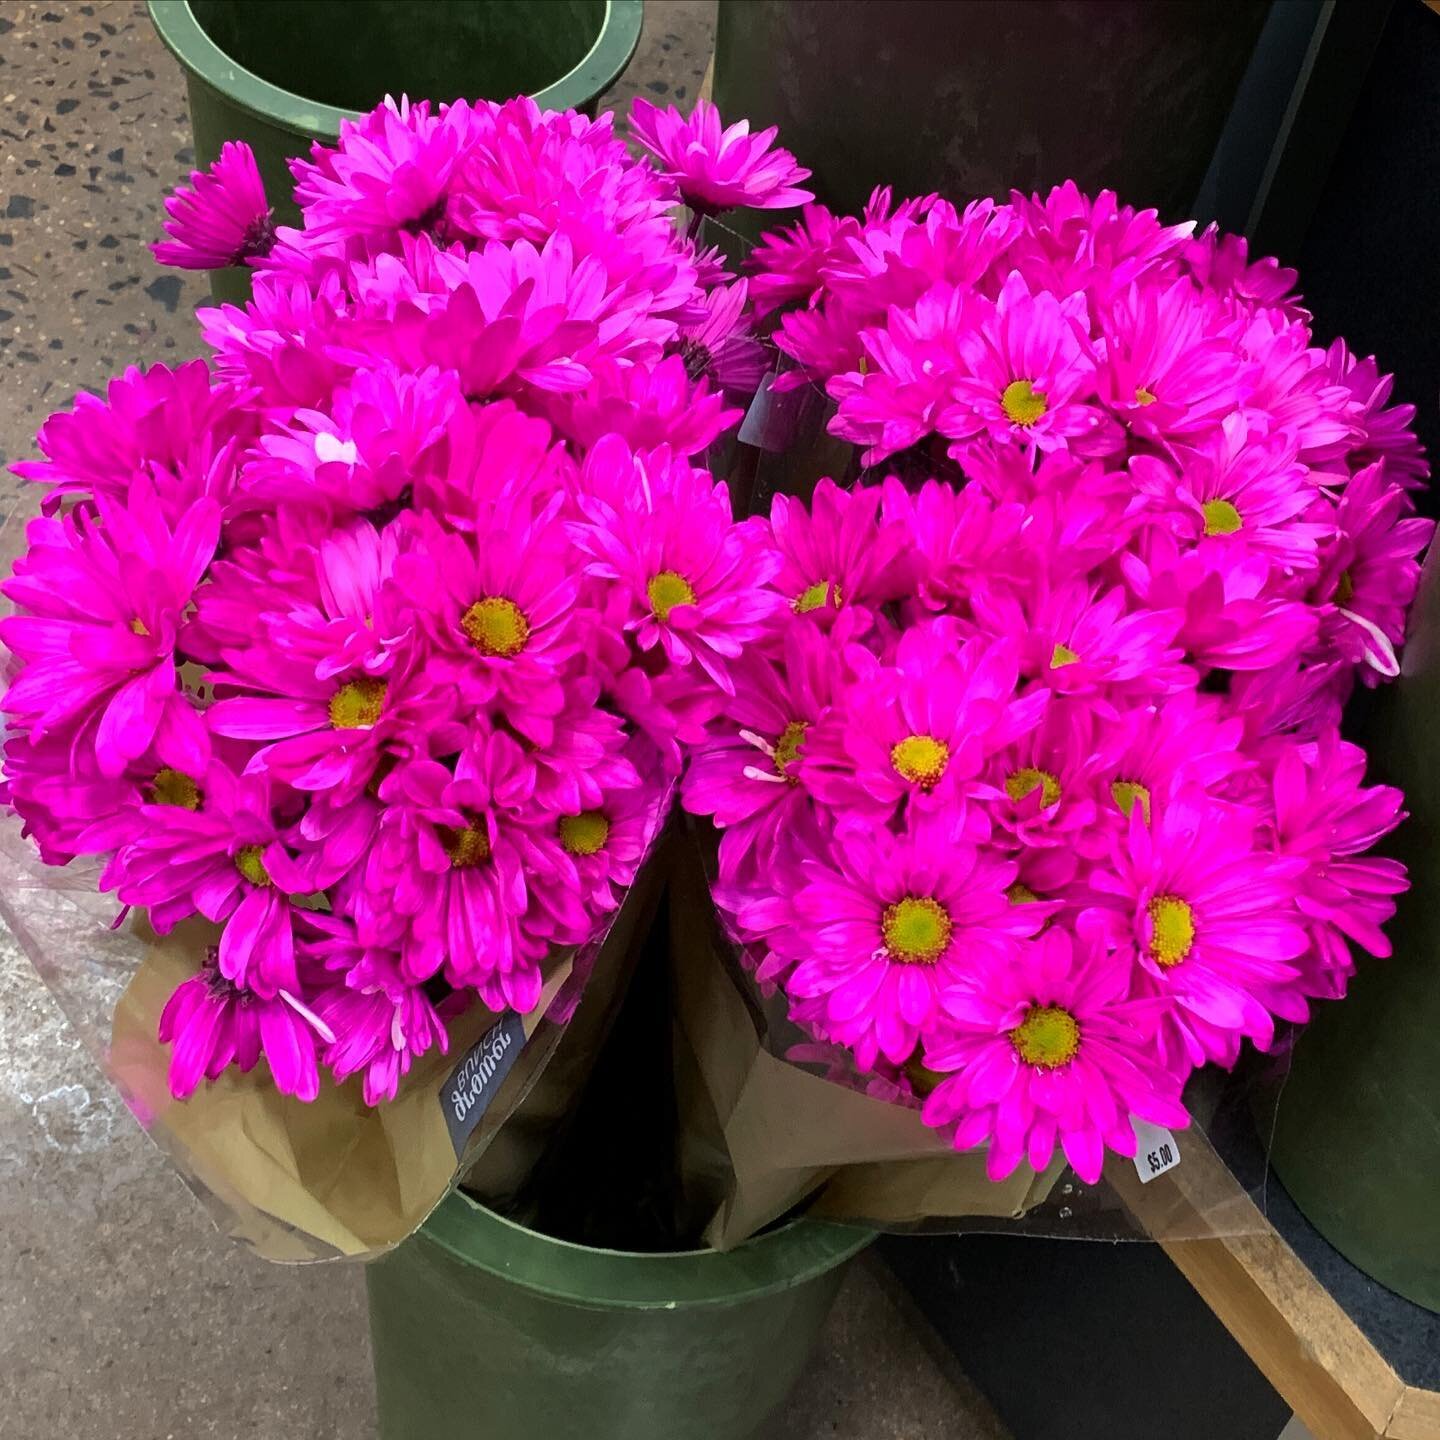 Always fun to surprise someone with day-glo fuchsia daisies.  Bonus when I get to look at them because we&rsquo;re in the same office.